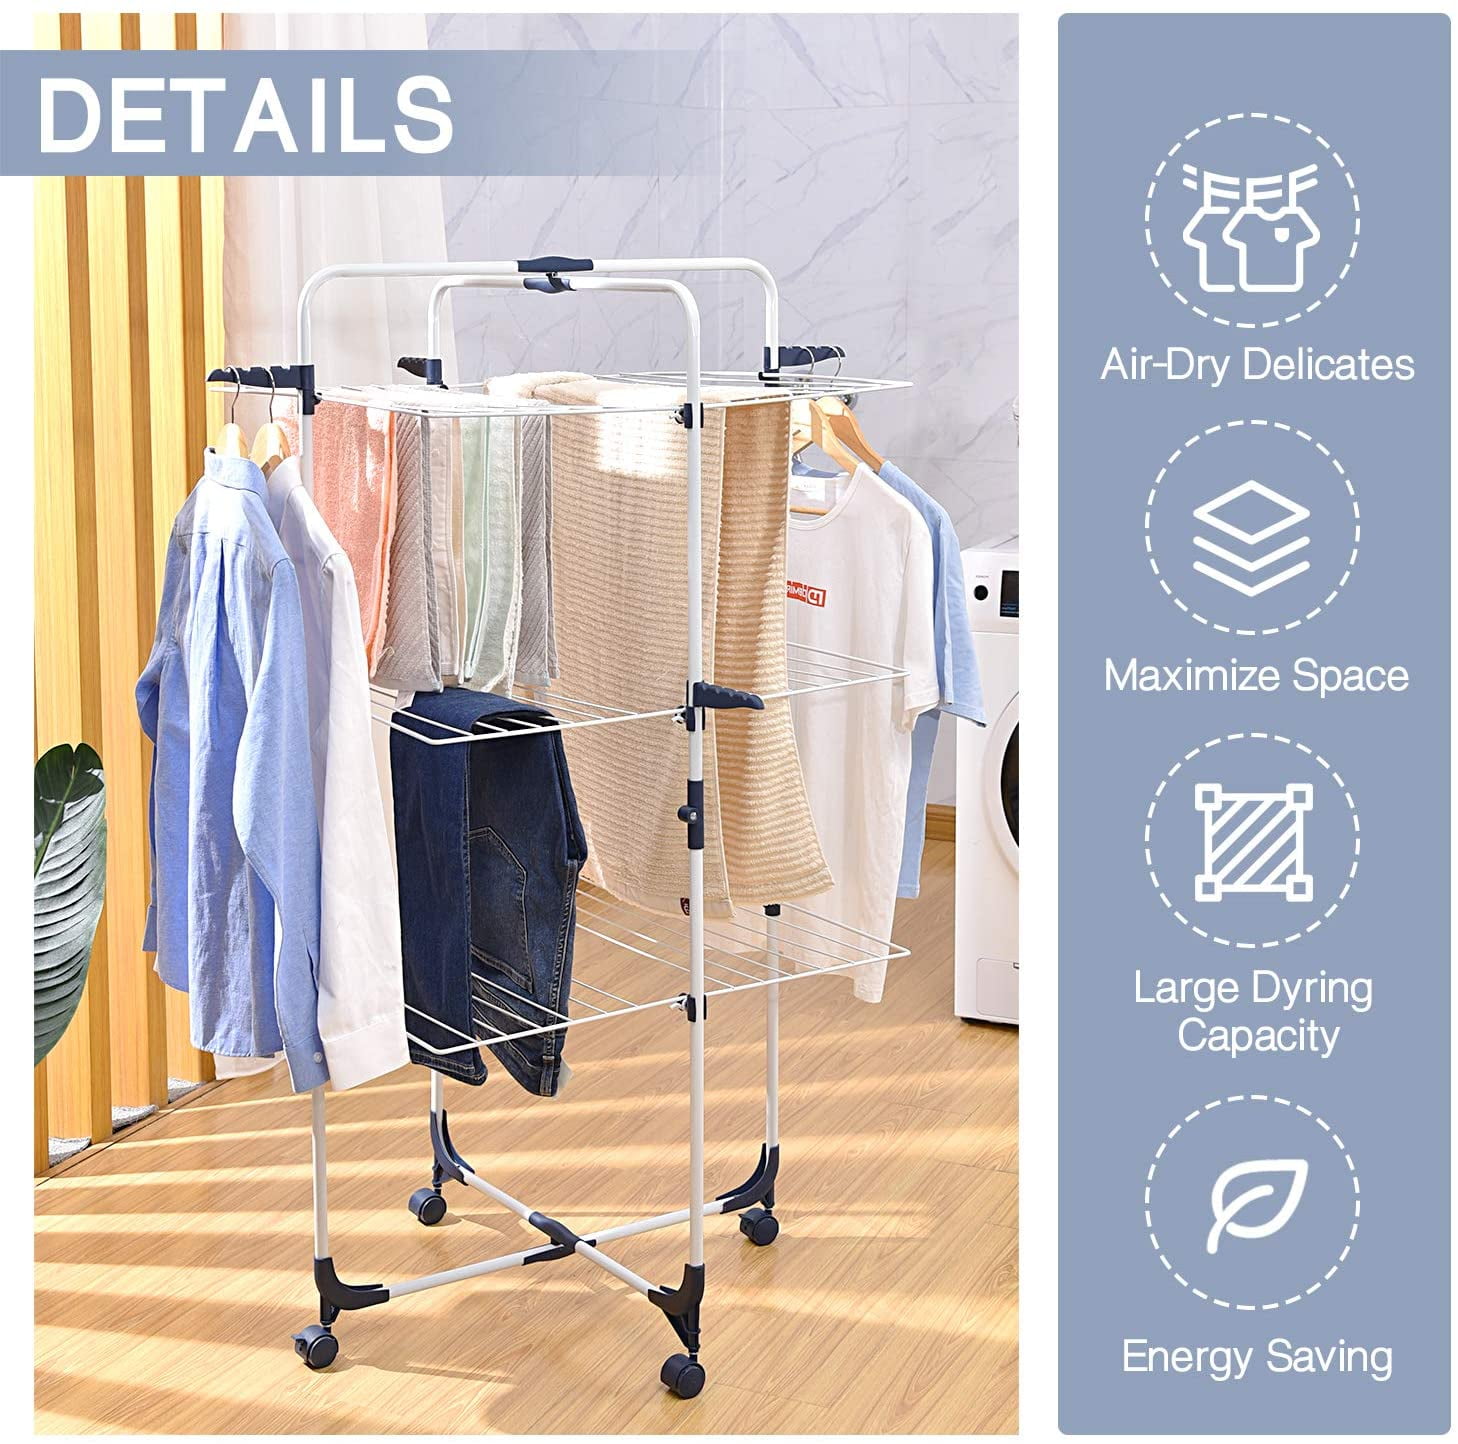 Duronic Clothes Drying Rack CA30, 3 Tier Foldable Clothes Dryer, Elect